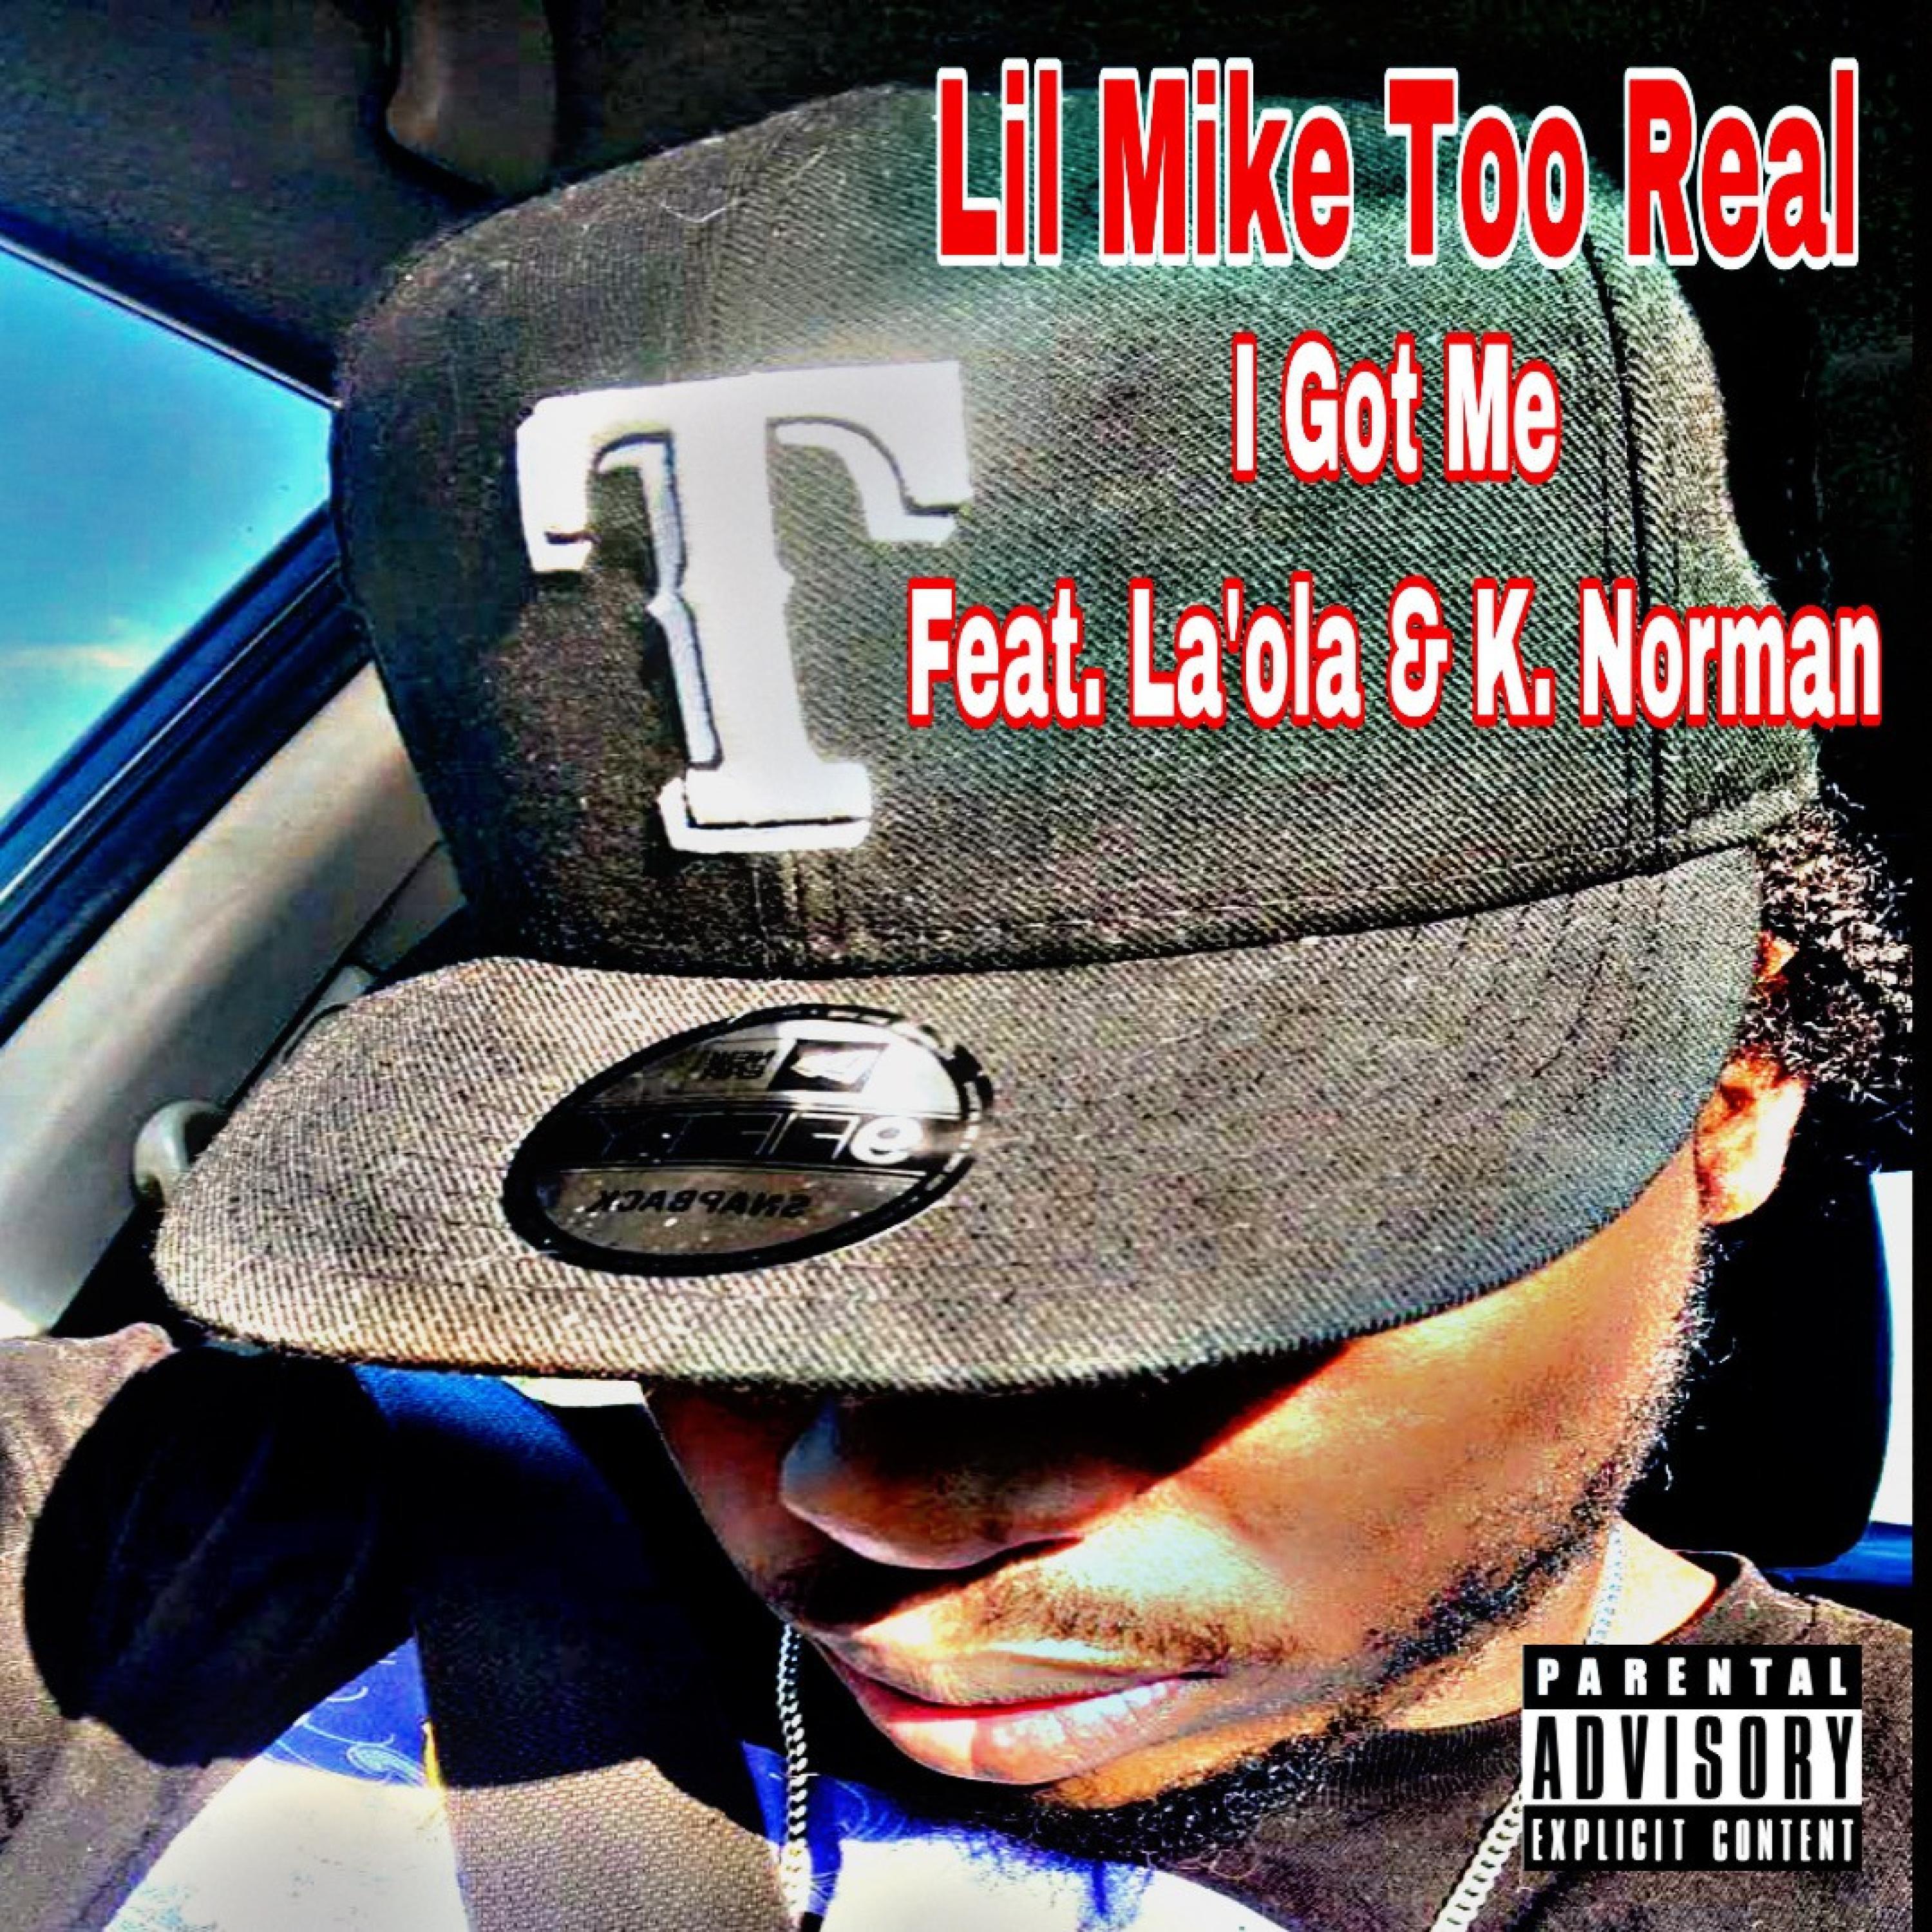 Lil Mike Too Real - I Got Me (feat. La'ola & K. Norman)